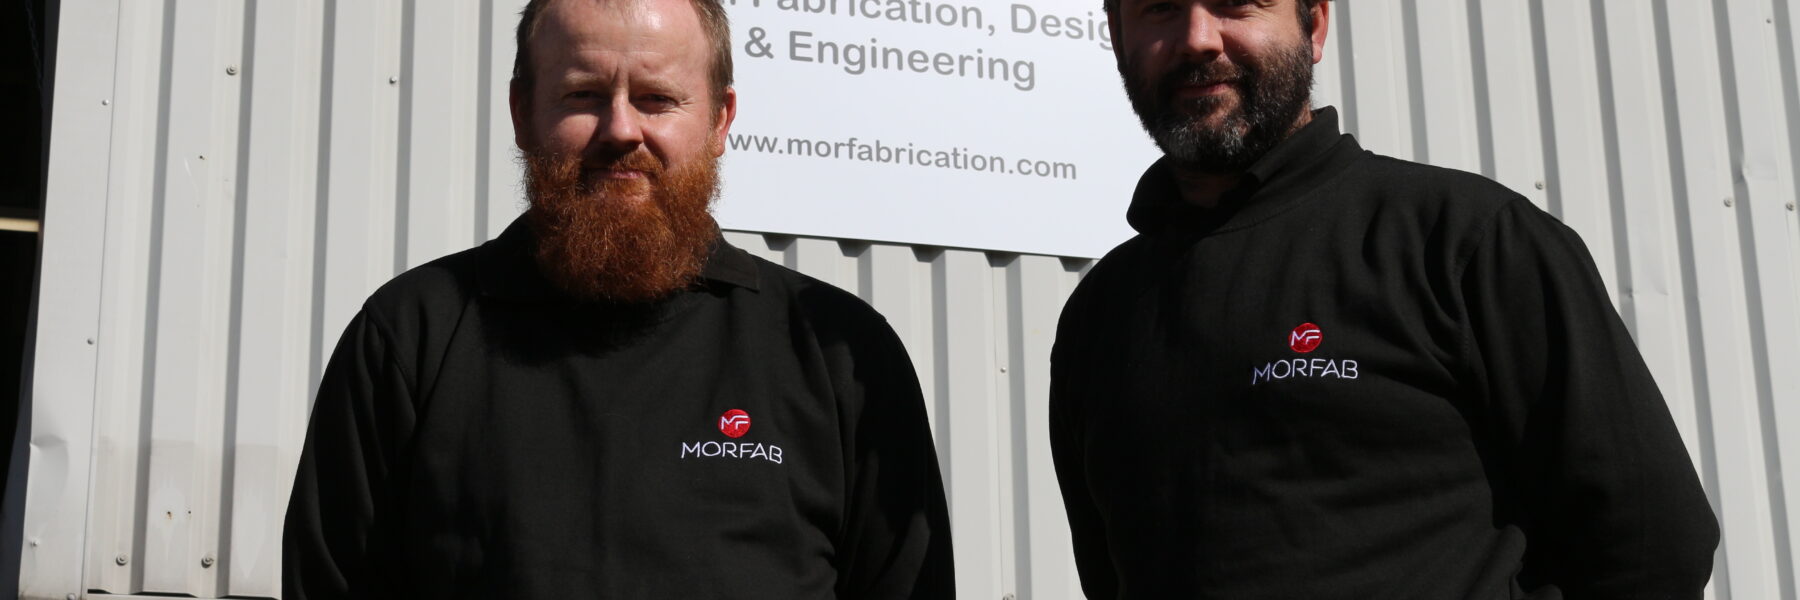 New premises support Morfabrication continued growth